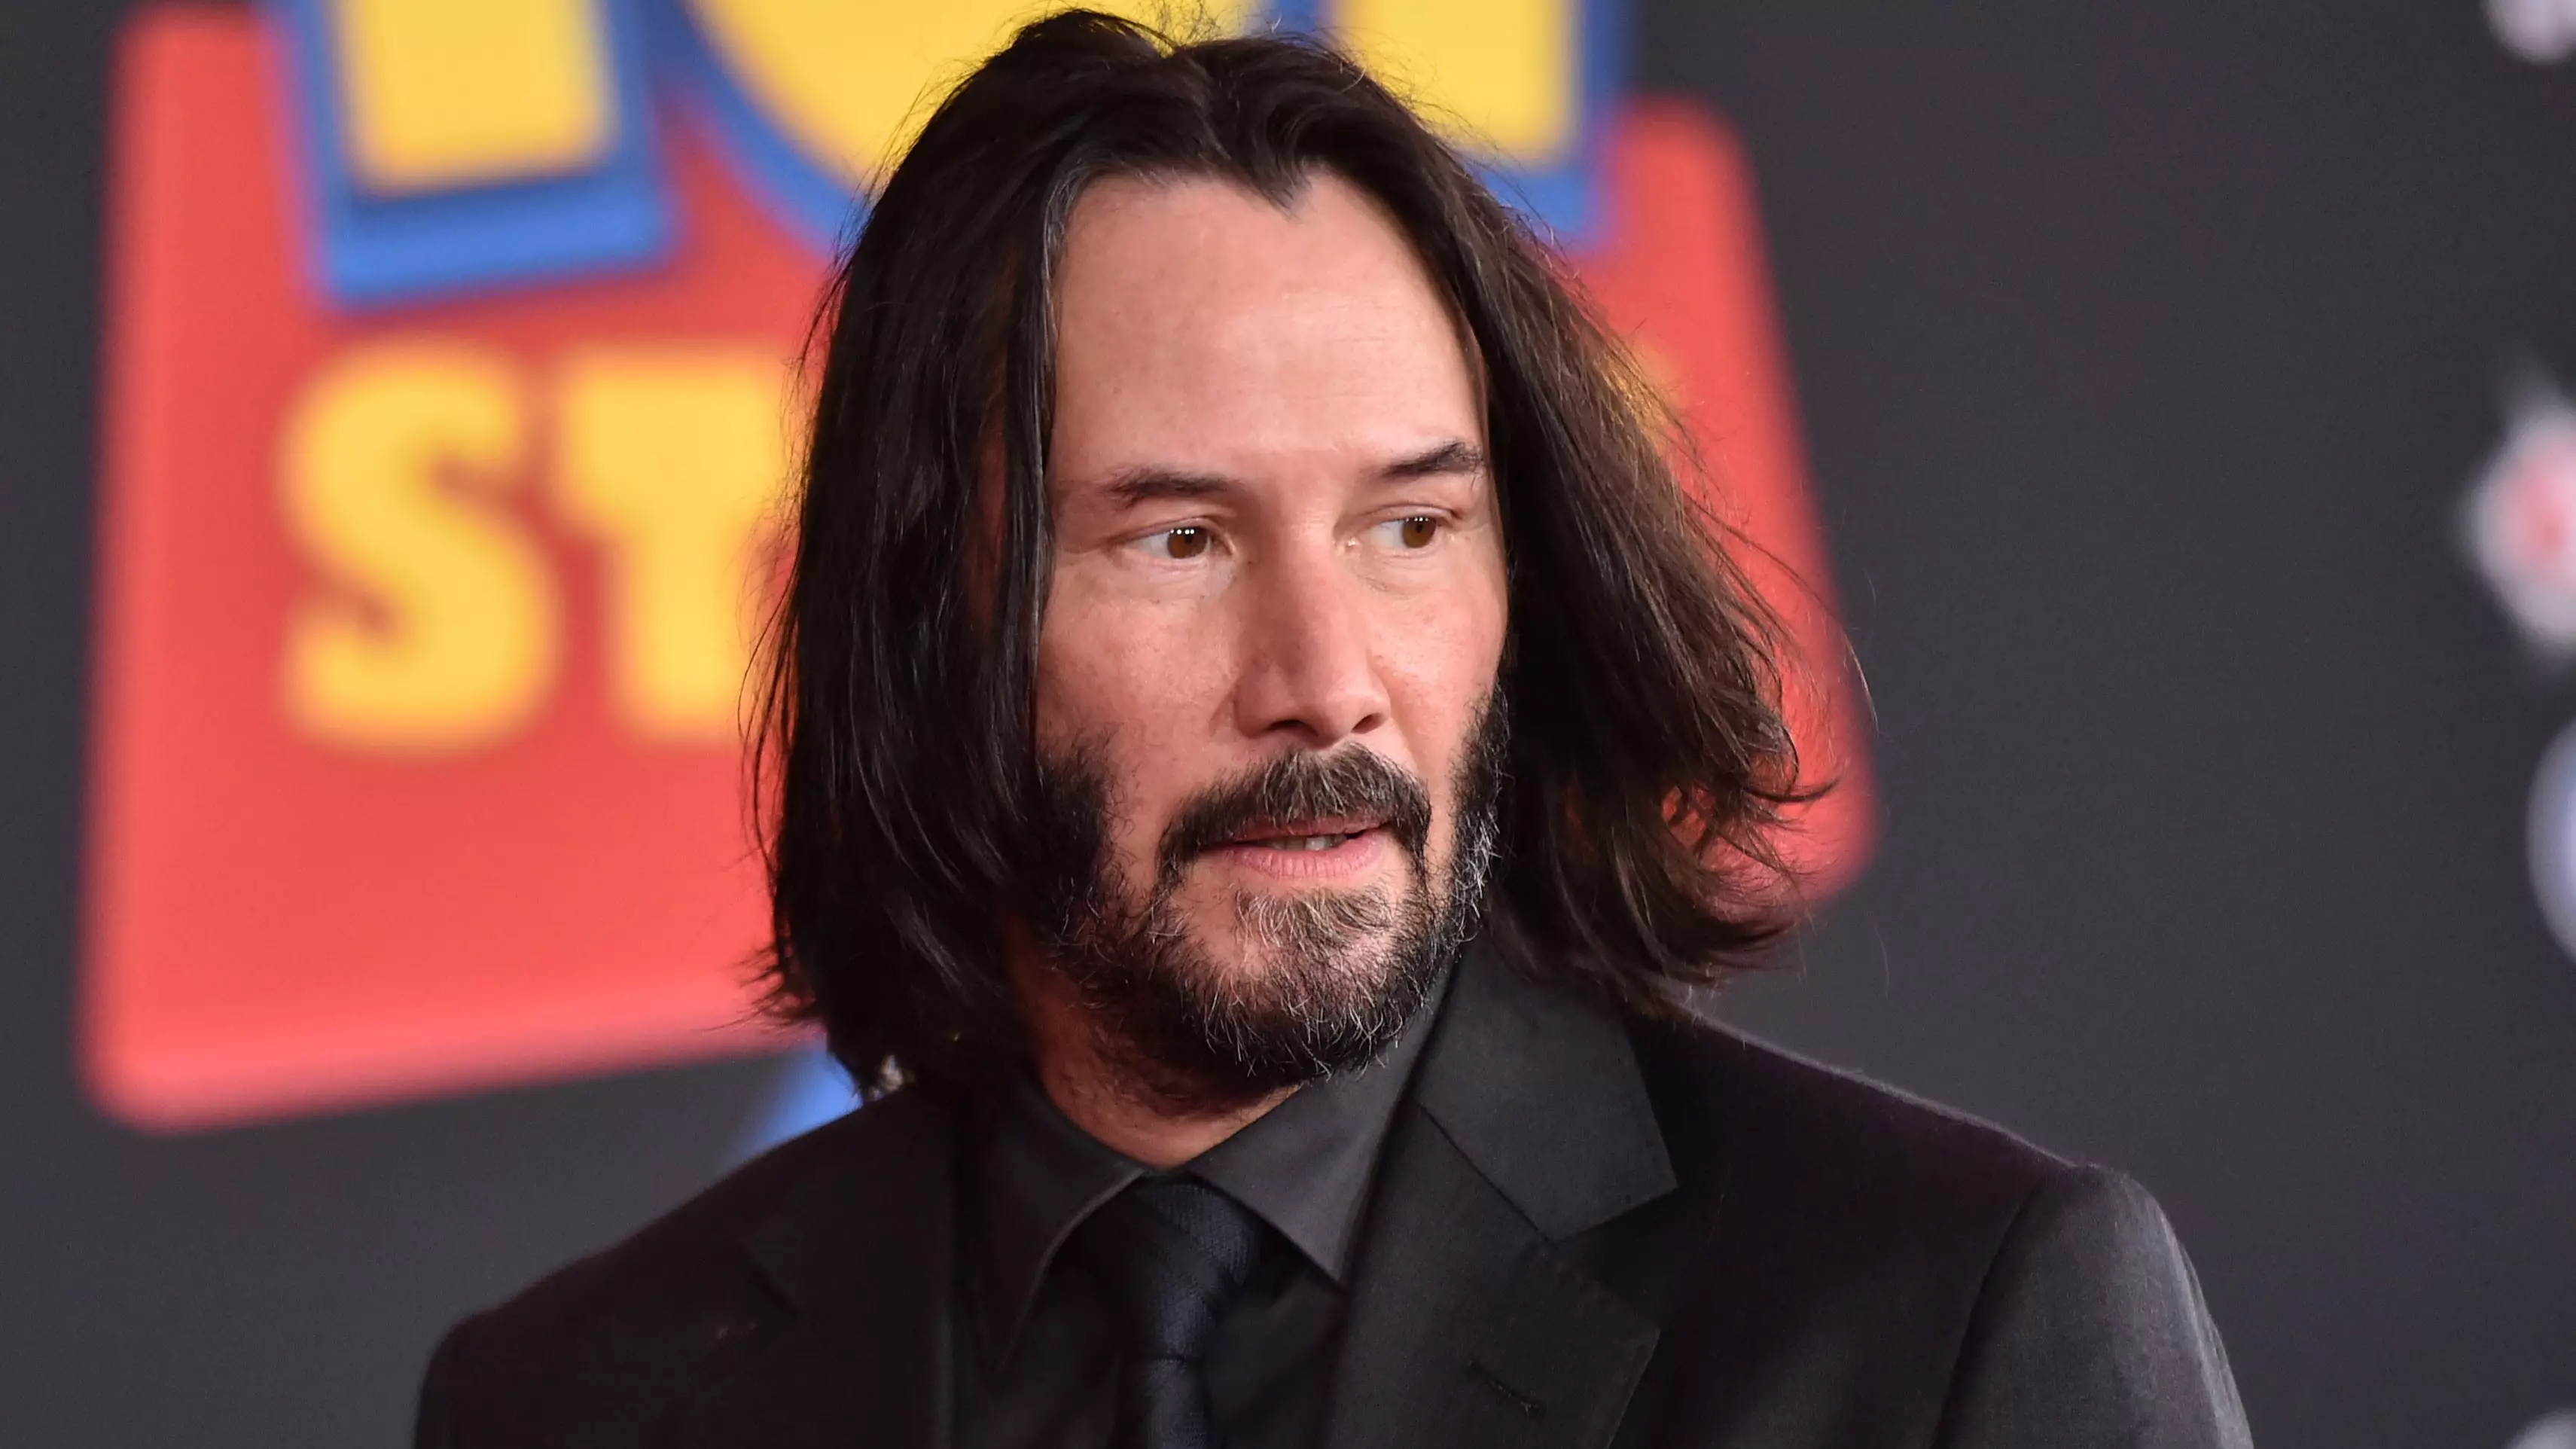 Keanu Reeves Autographs Fan's Sign On Way To Bill And Ted Set